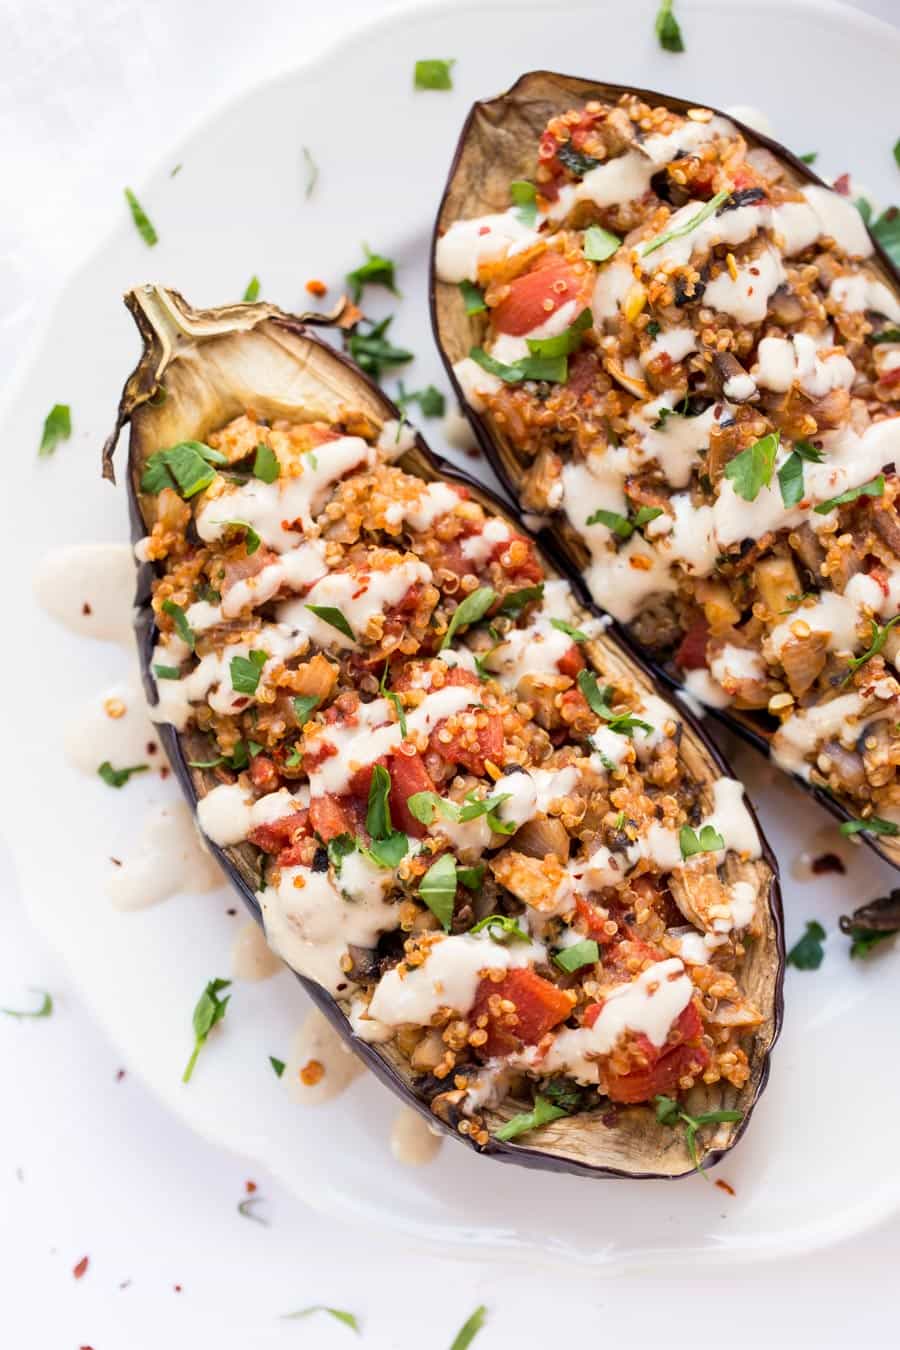 30 Best Recipes For Eggplants Easy and Healthy Recipes